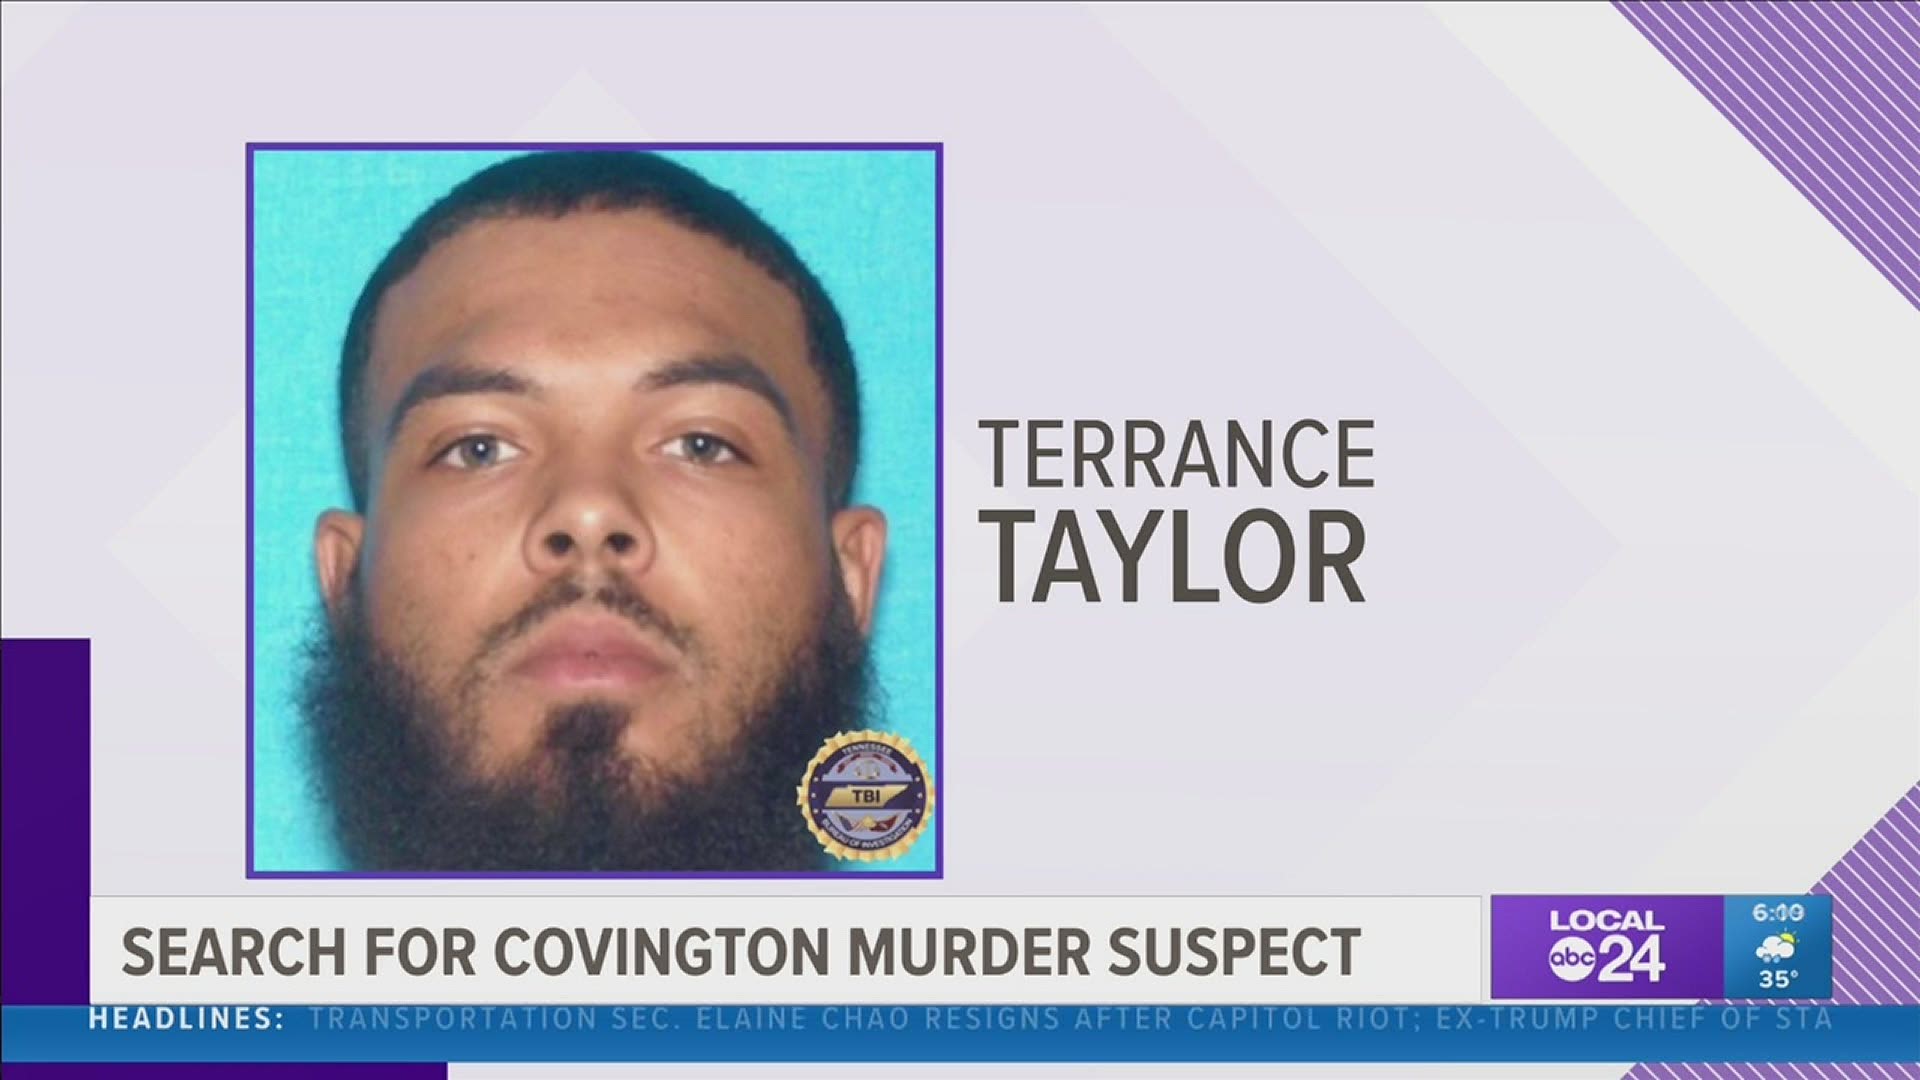 U.S. Marshals are searching for Terrance Sharell Taylor, wanted for First Degree Murder in Covington, Tennessee.